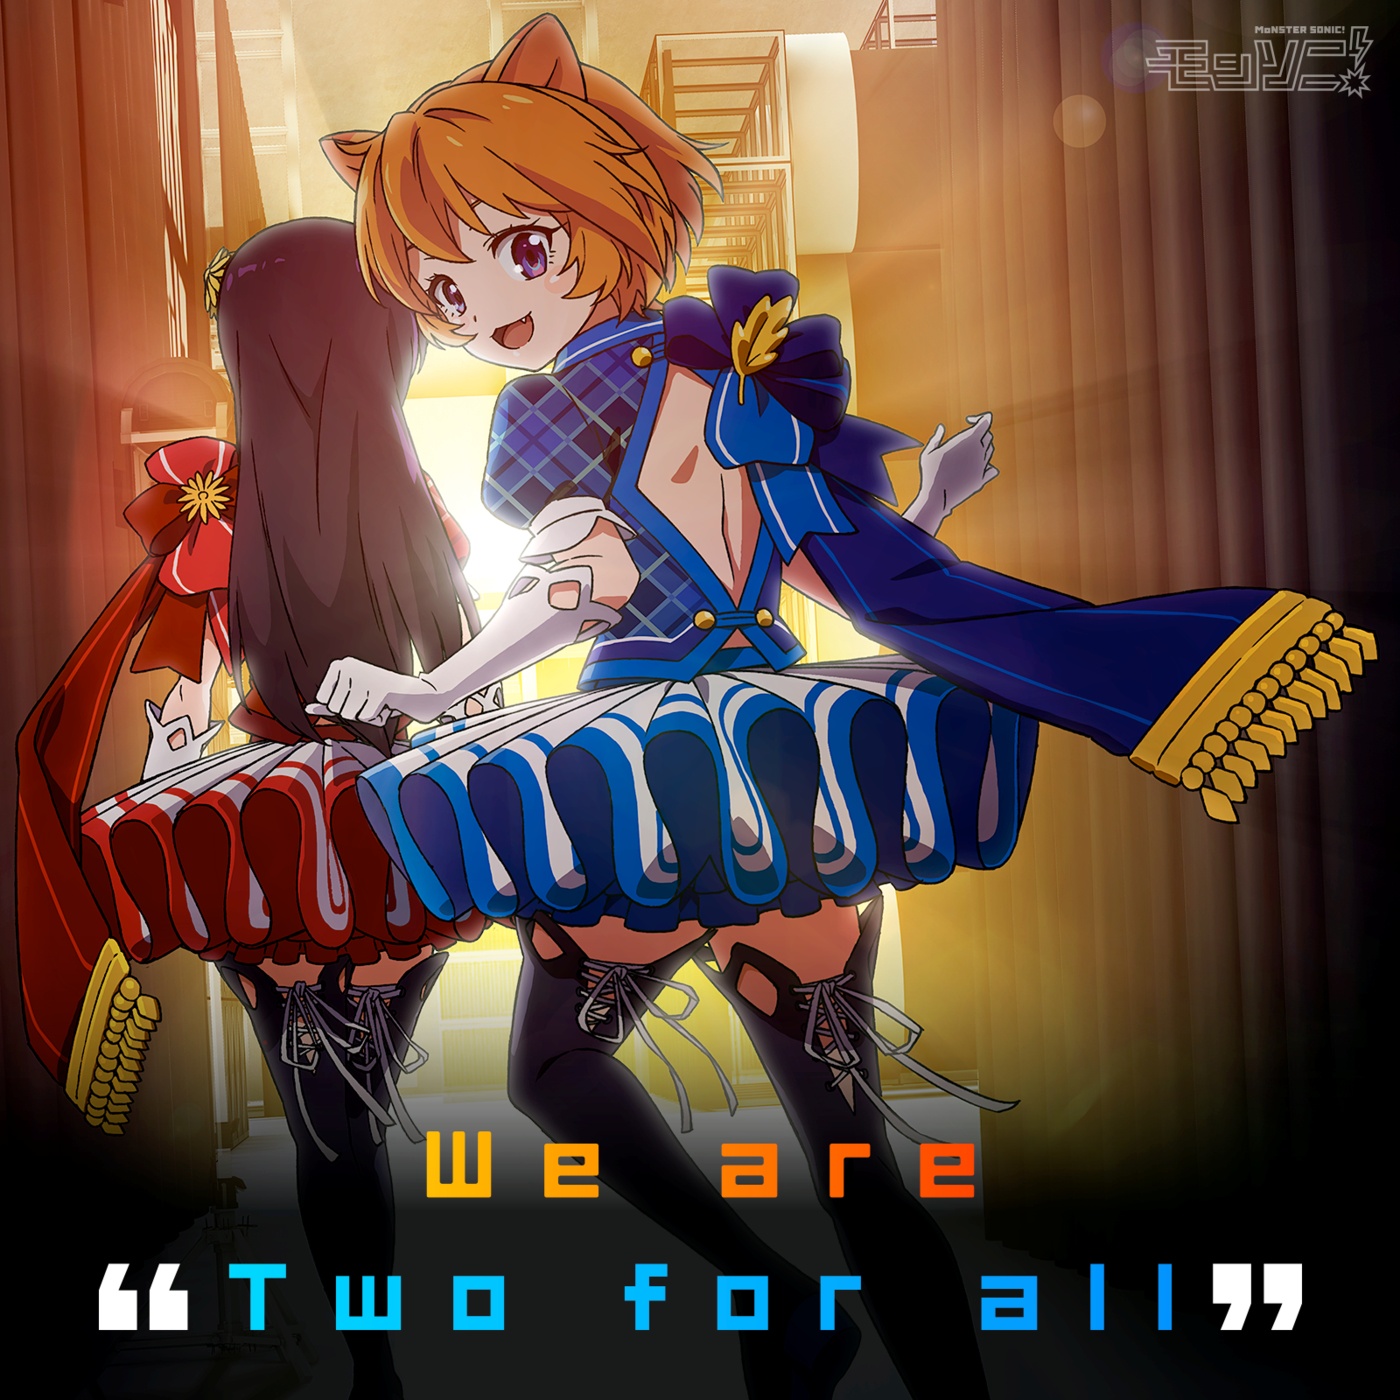 We are "Two for all"